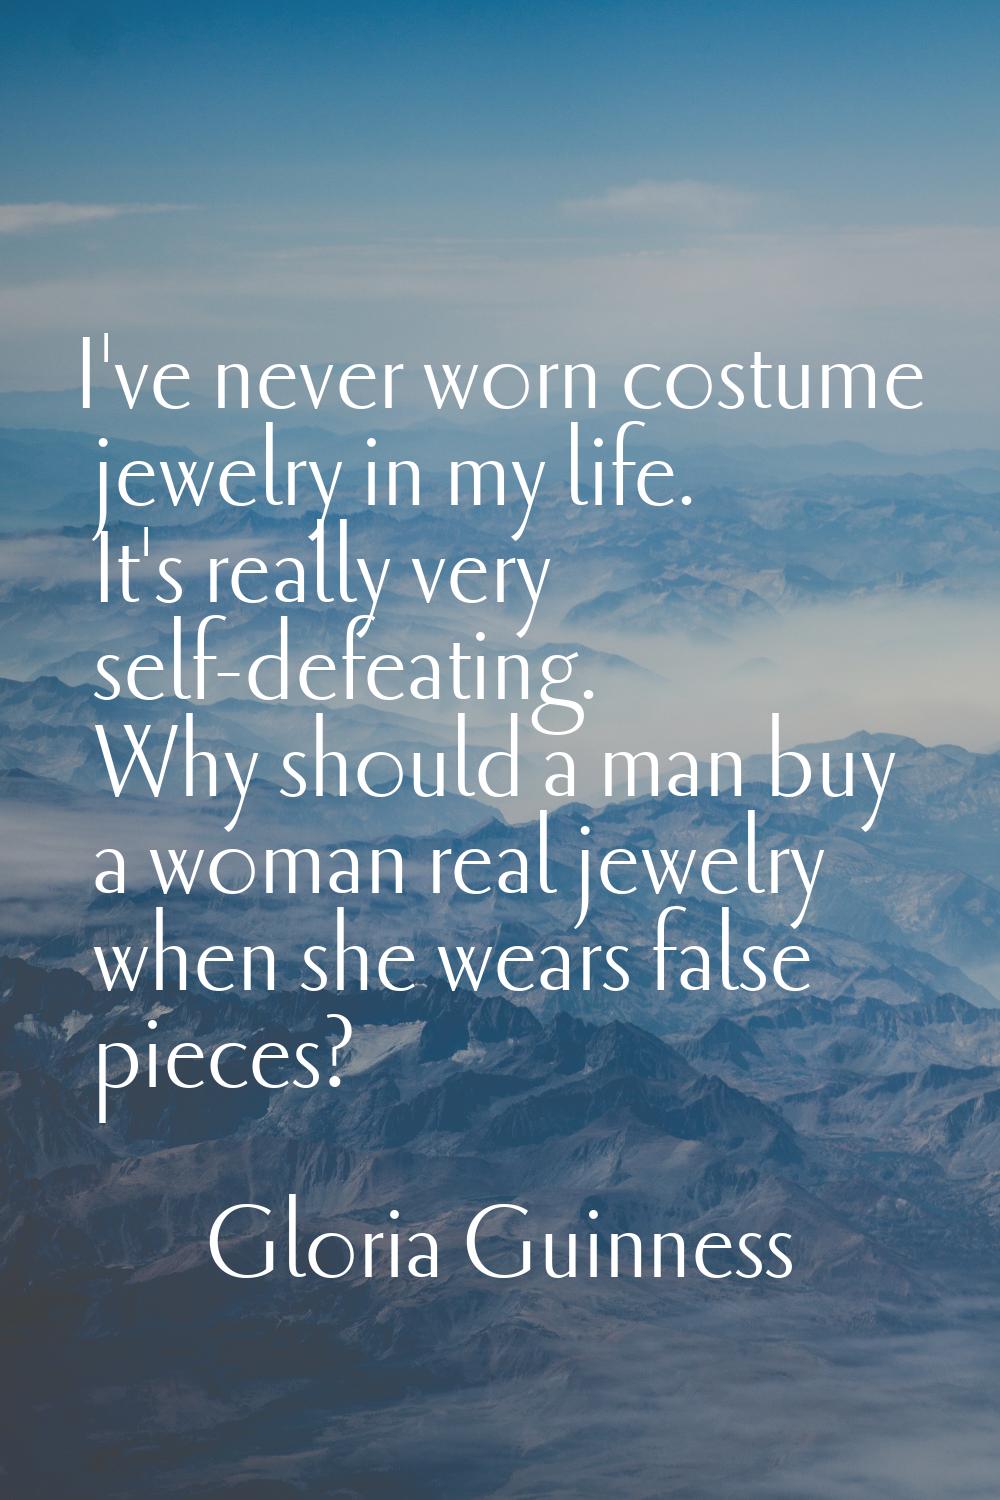 I've never worn costume jewelry in my life. It's really very self-defeating. Why should a man buy a